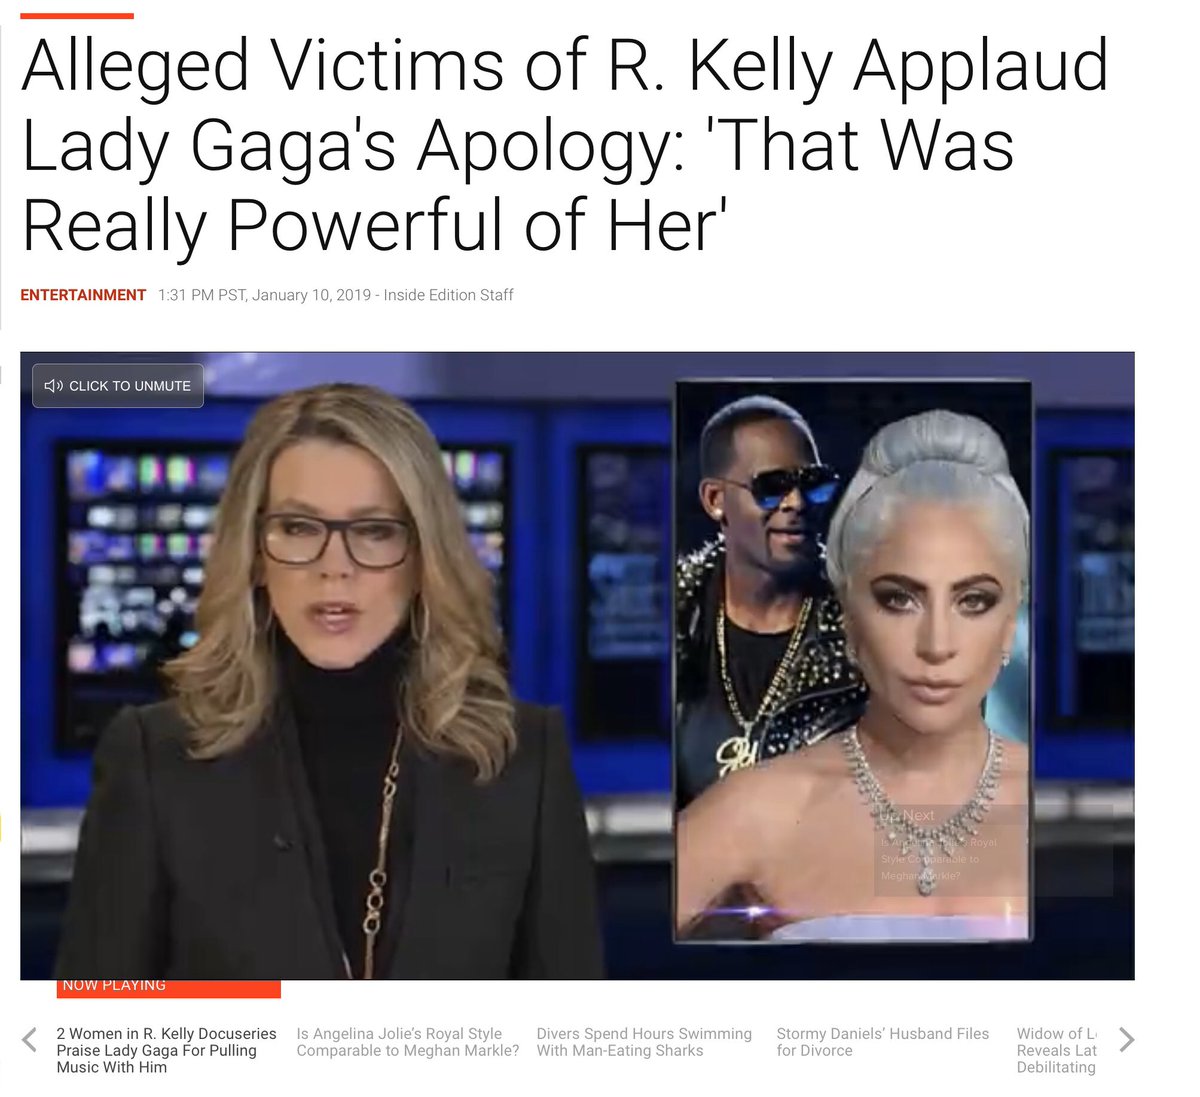 Think of this in regards to a Scooter reviving R. Kelly’s career in 2013 by adding him to a Justin Bieber track.Every other artist who worked with Kelly apologized, including Gaga (a survivor herself) who removed their duet from streaming & was then attacked for doing so.